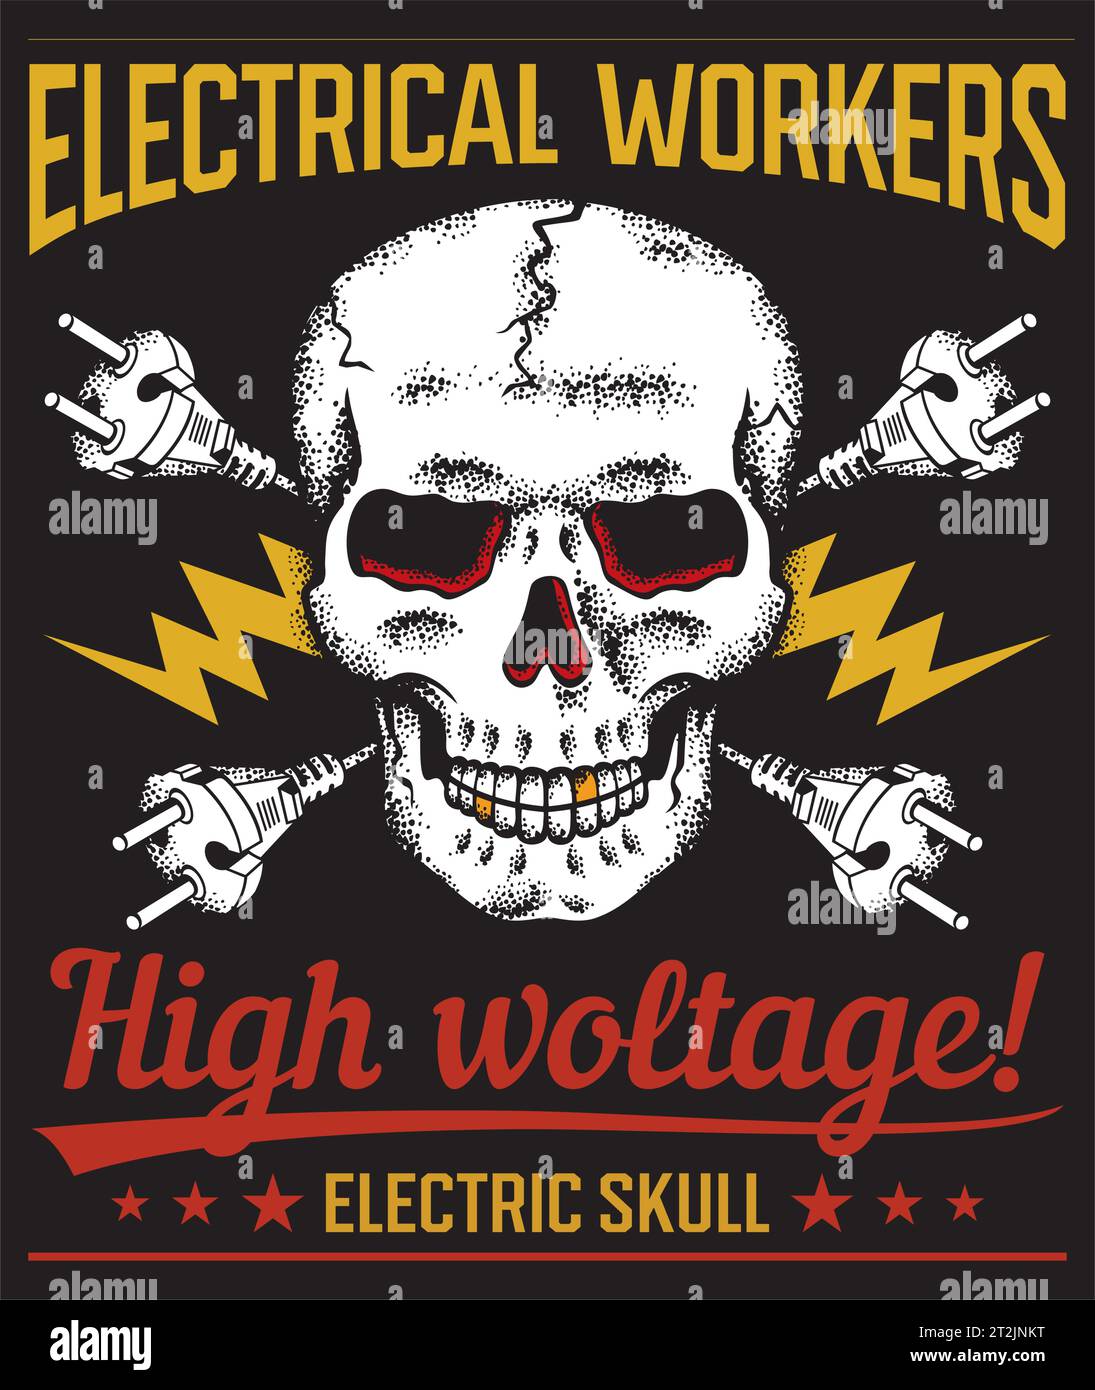 Electrical Workers Poster. High Voltage! Electric Skull. Danger Sign Color. Vector Illustration. Stock Vector